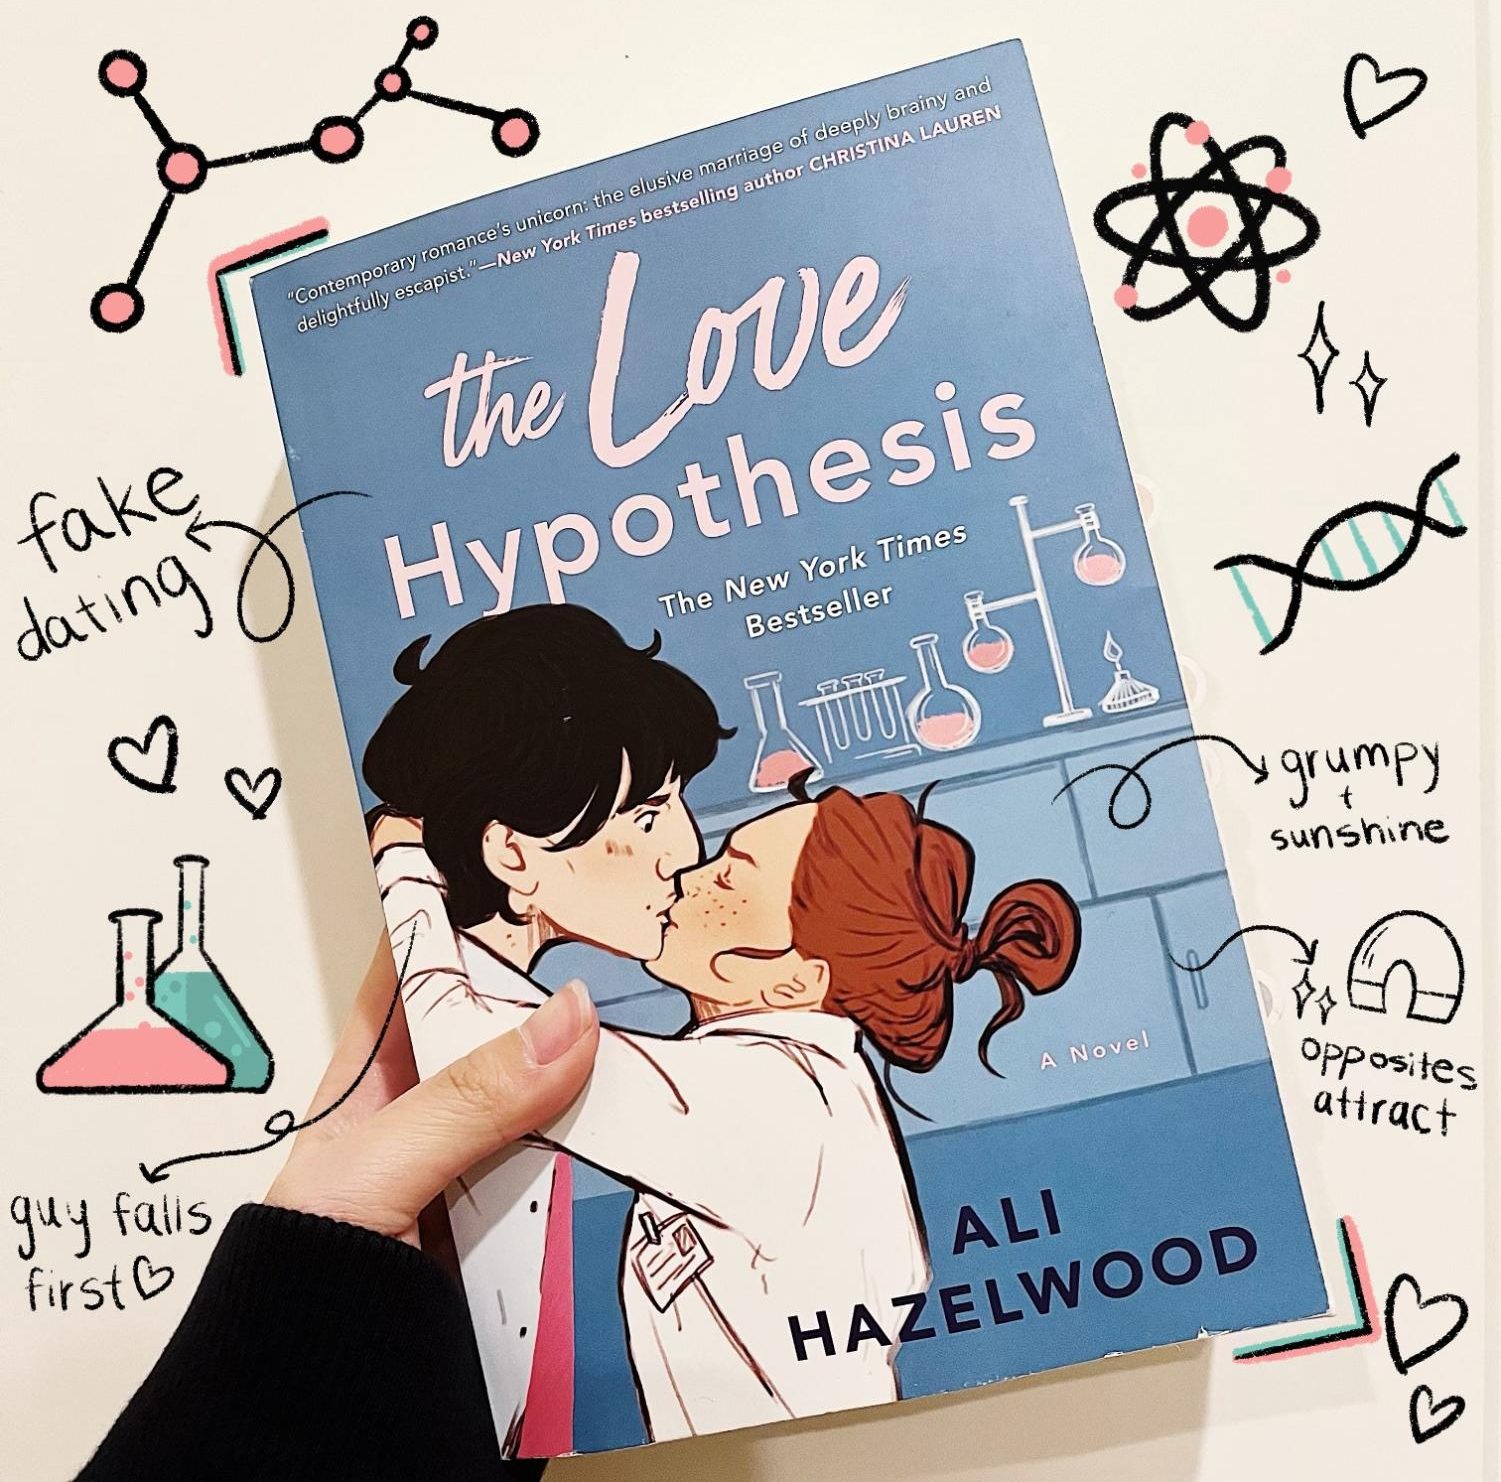 hypothesis for love